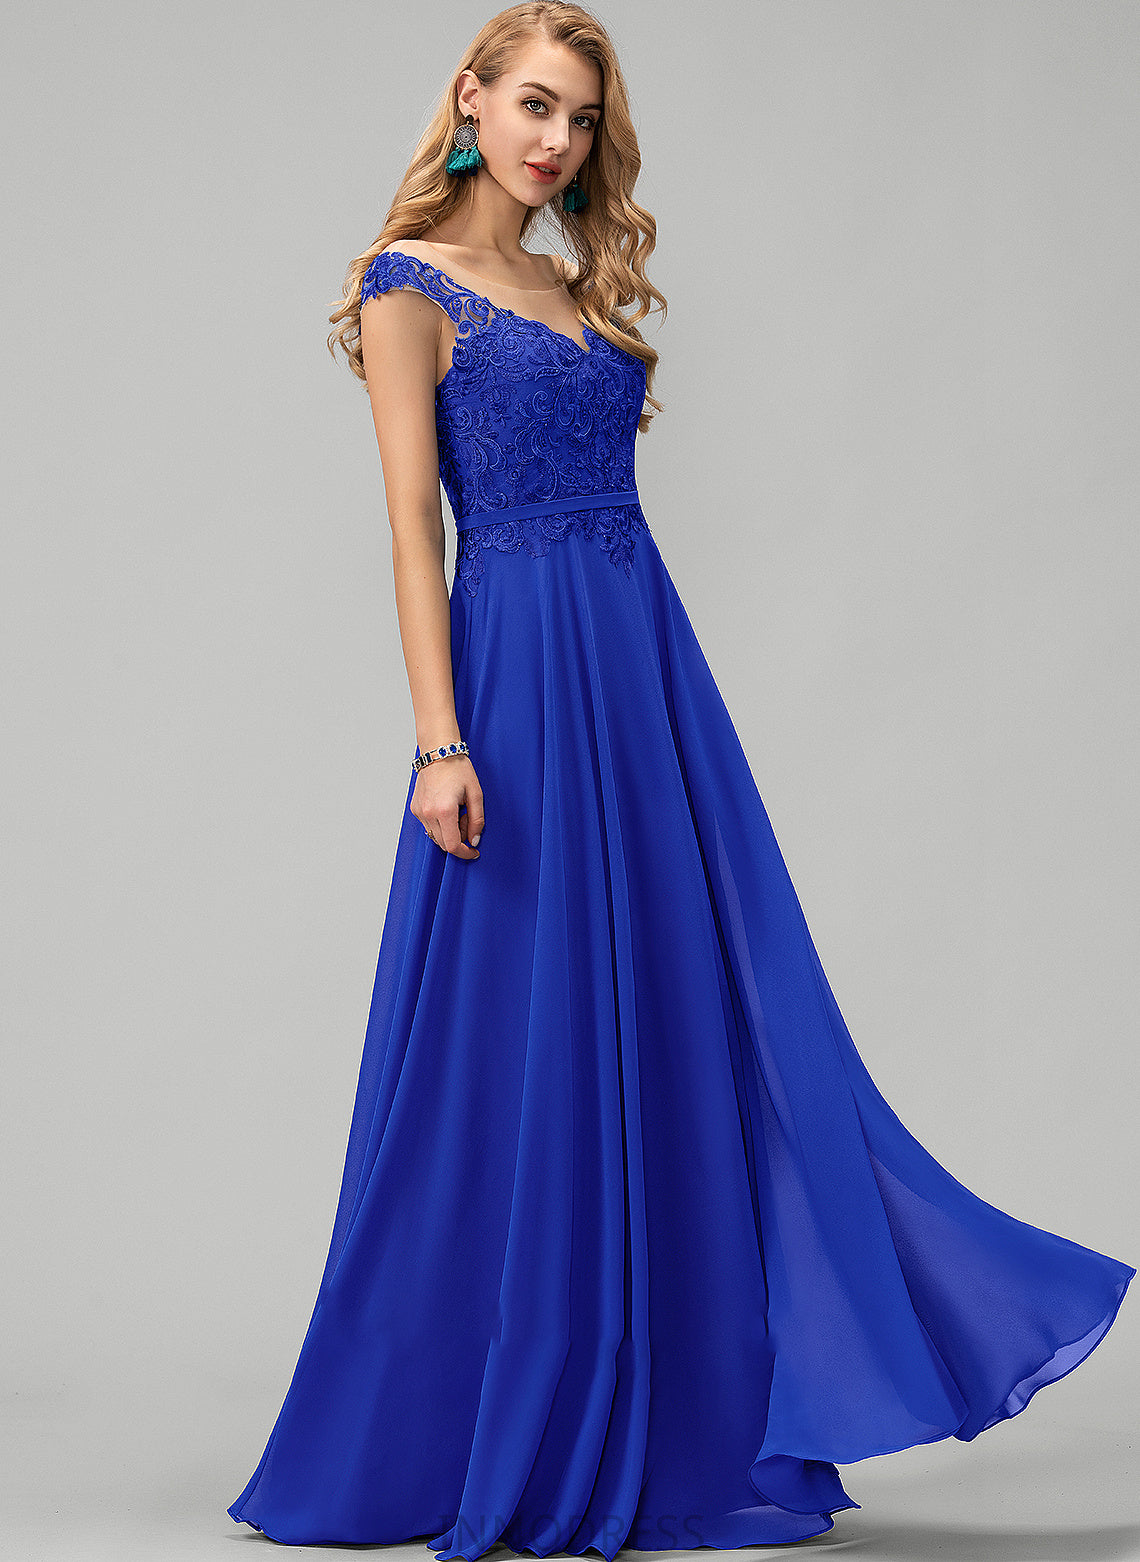 Neck Lace Chiffon With Marianna A-Line Floor-Length Scoop Sequins Prom Dresses